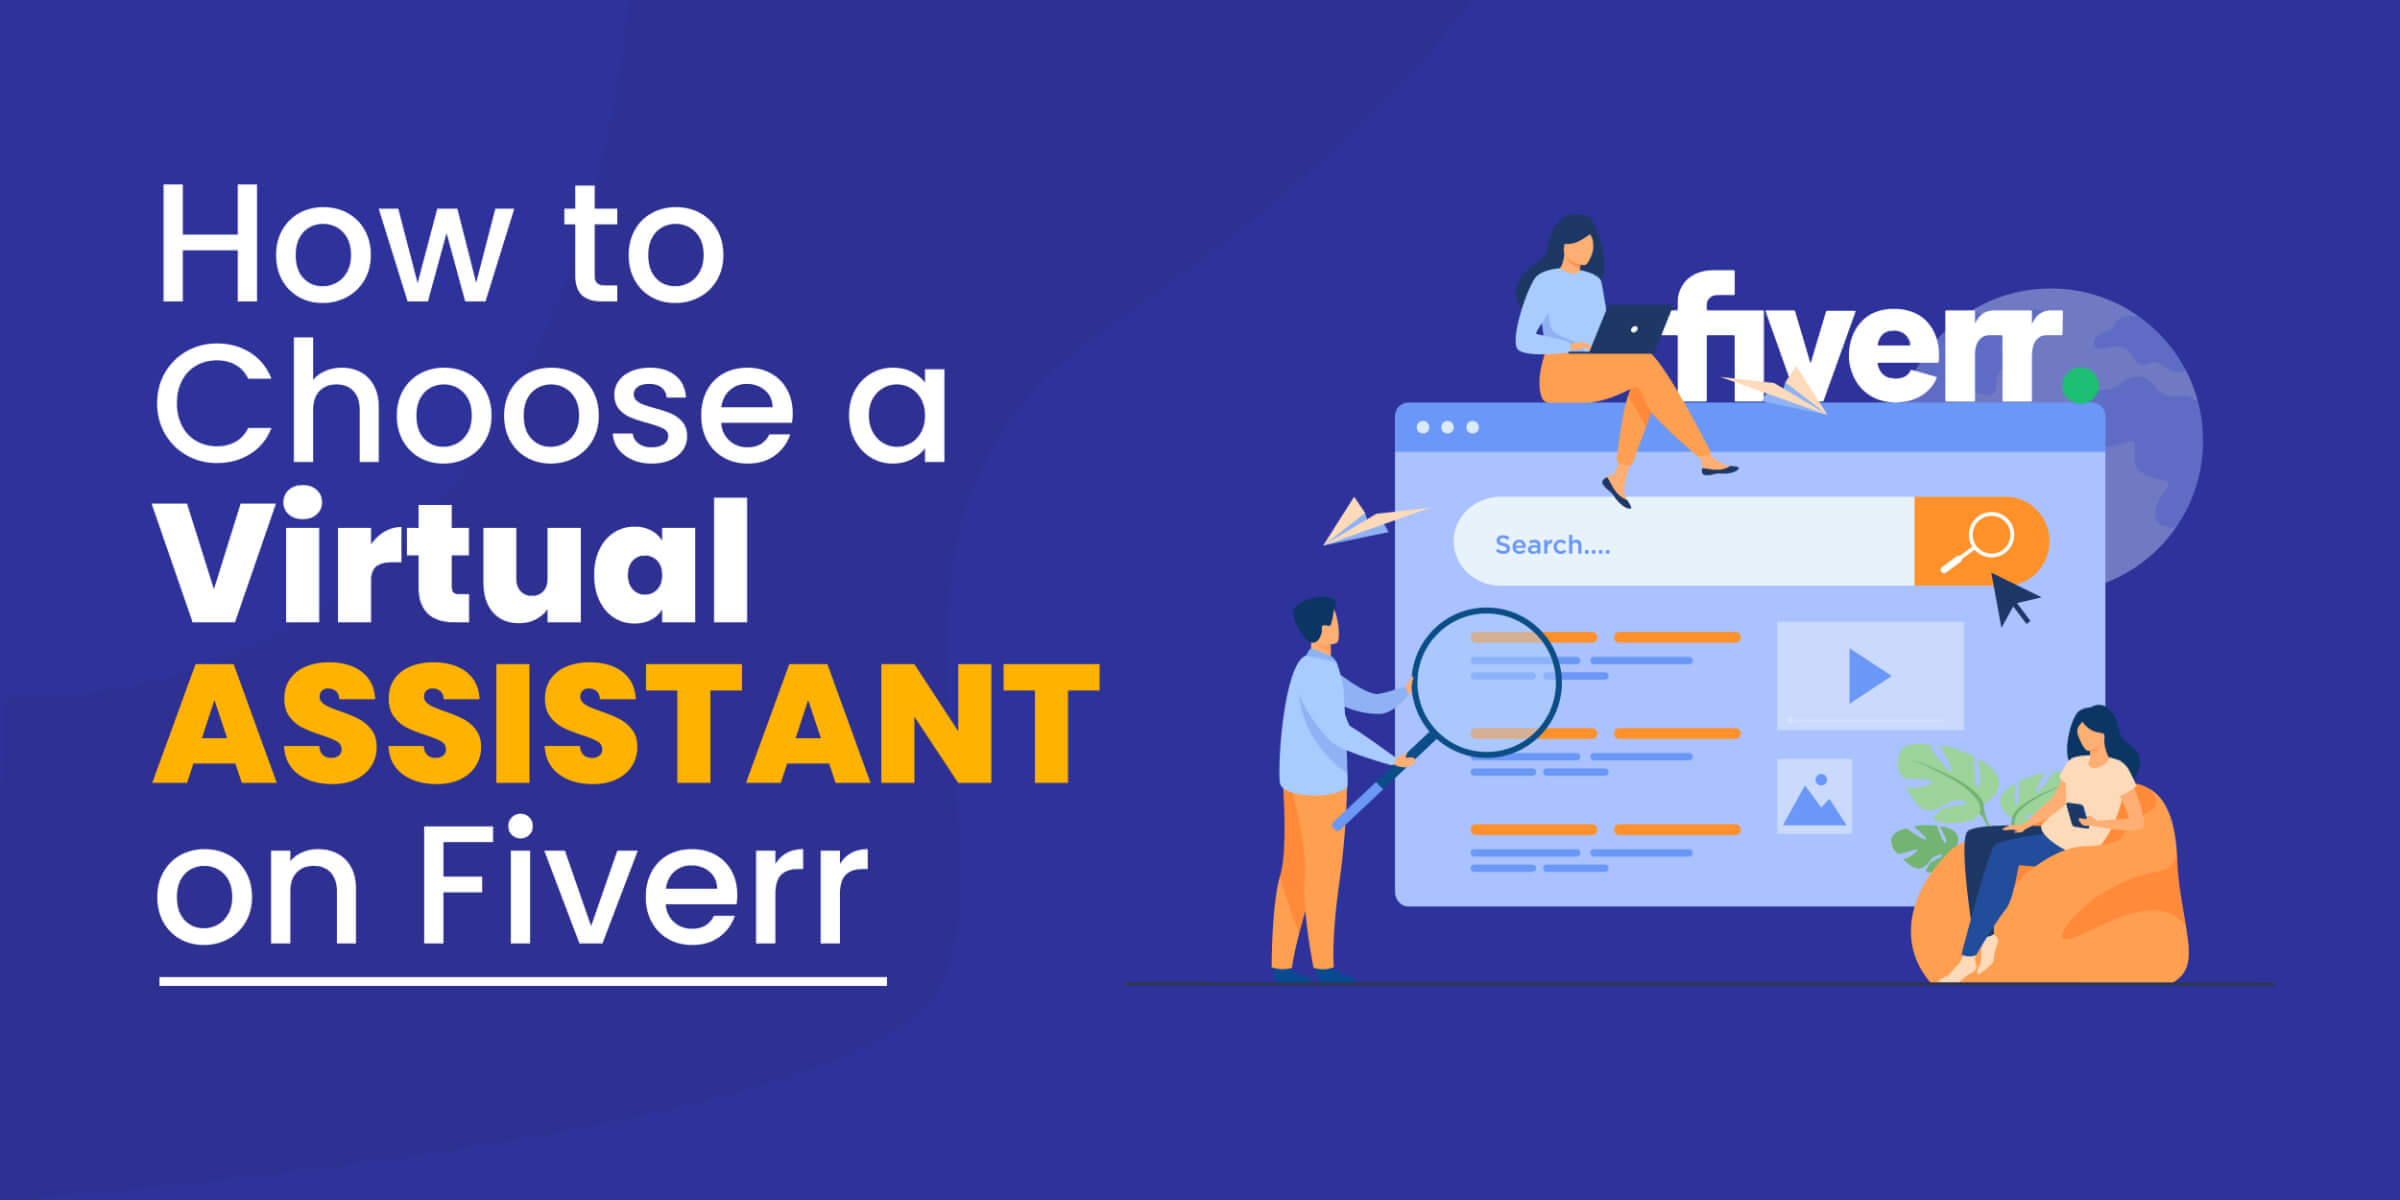 How to Choose Virtual Assistant on Fiverr